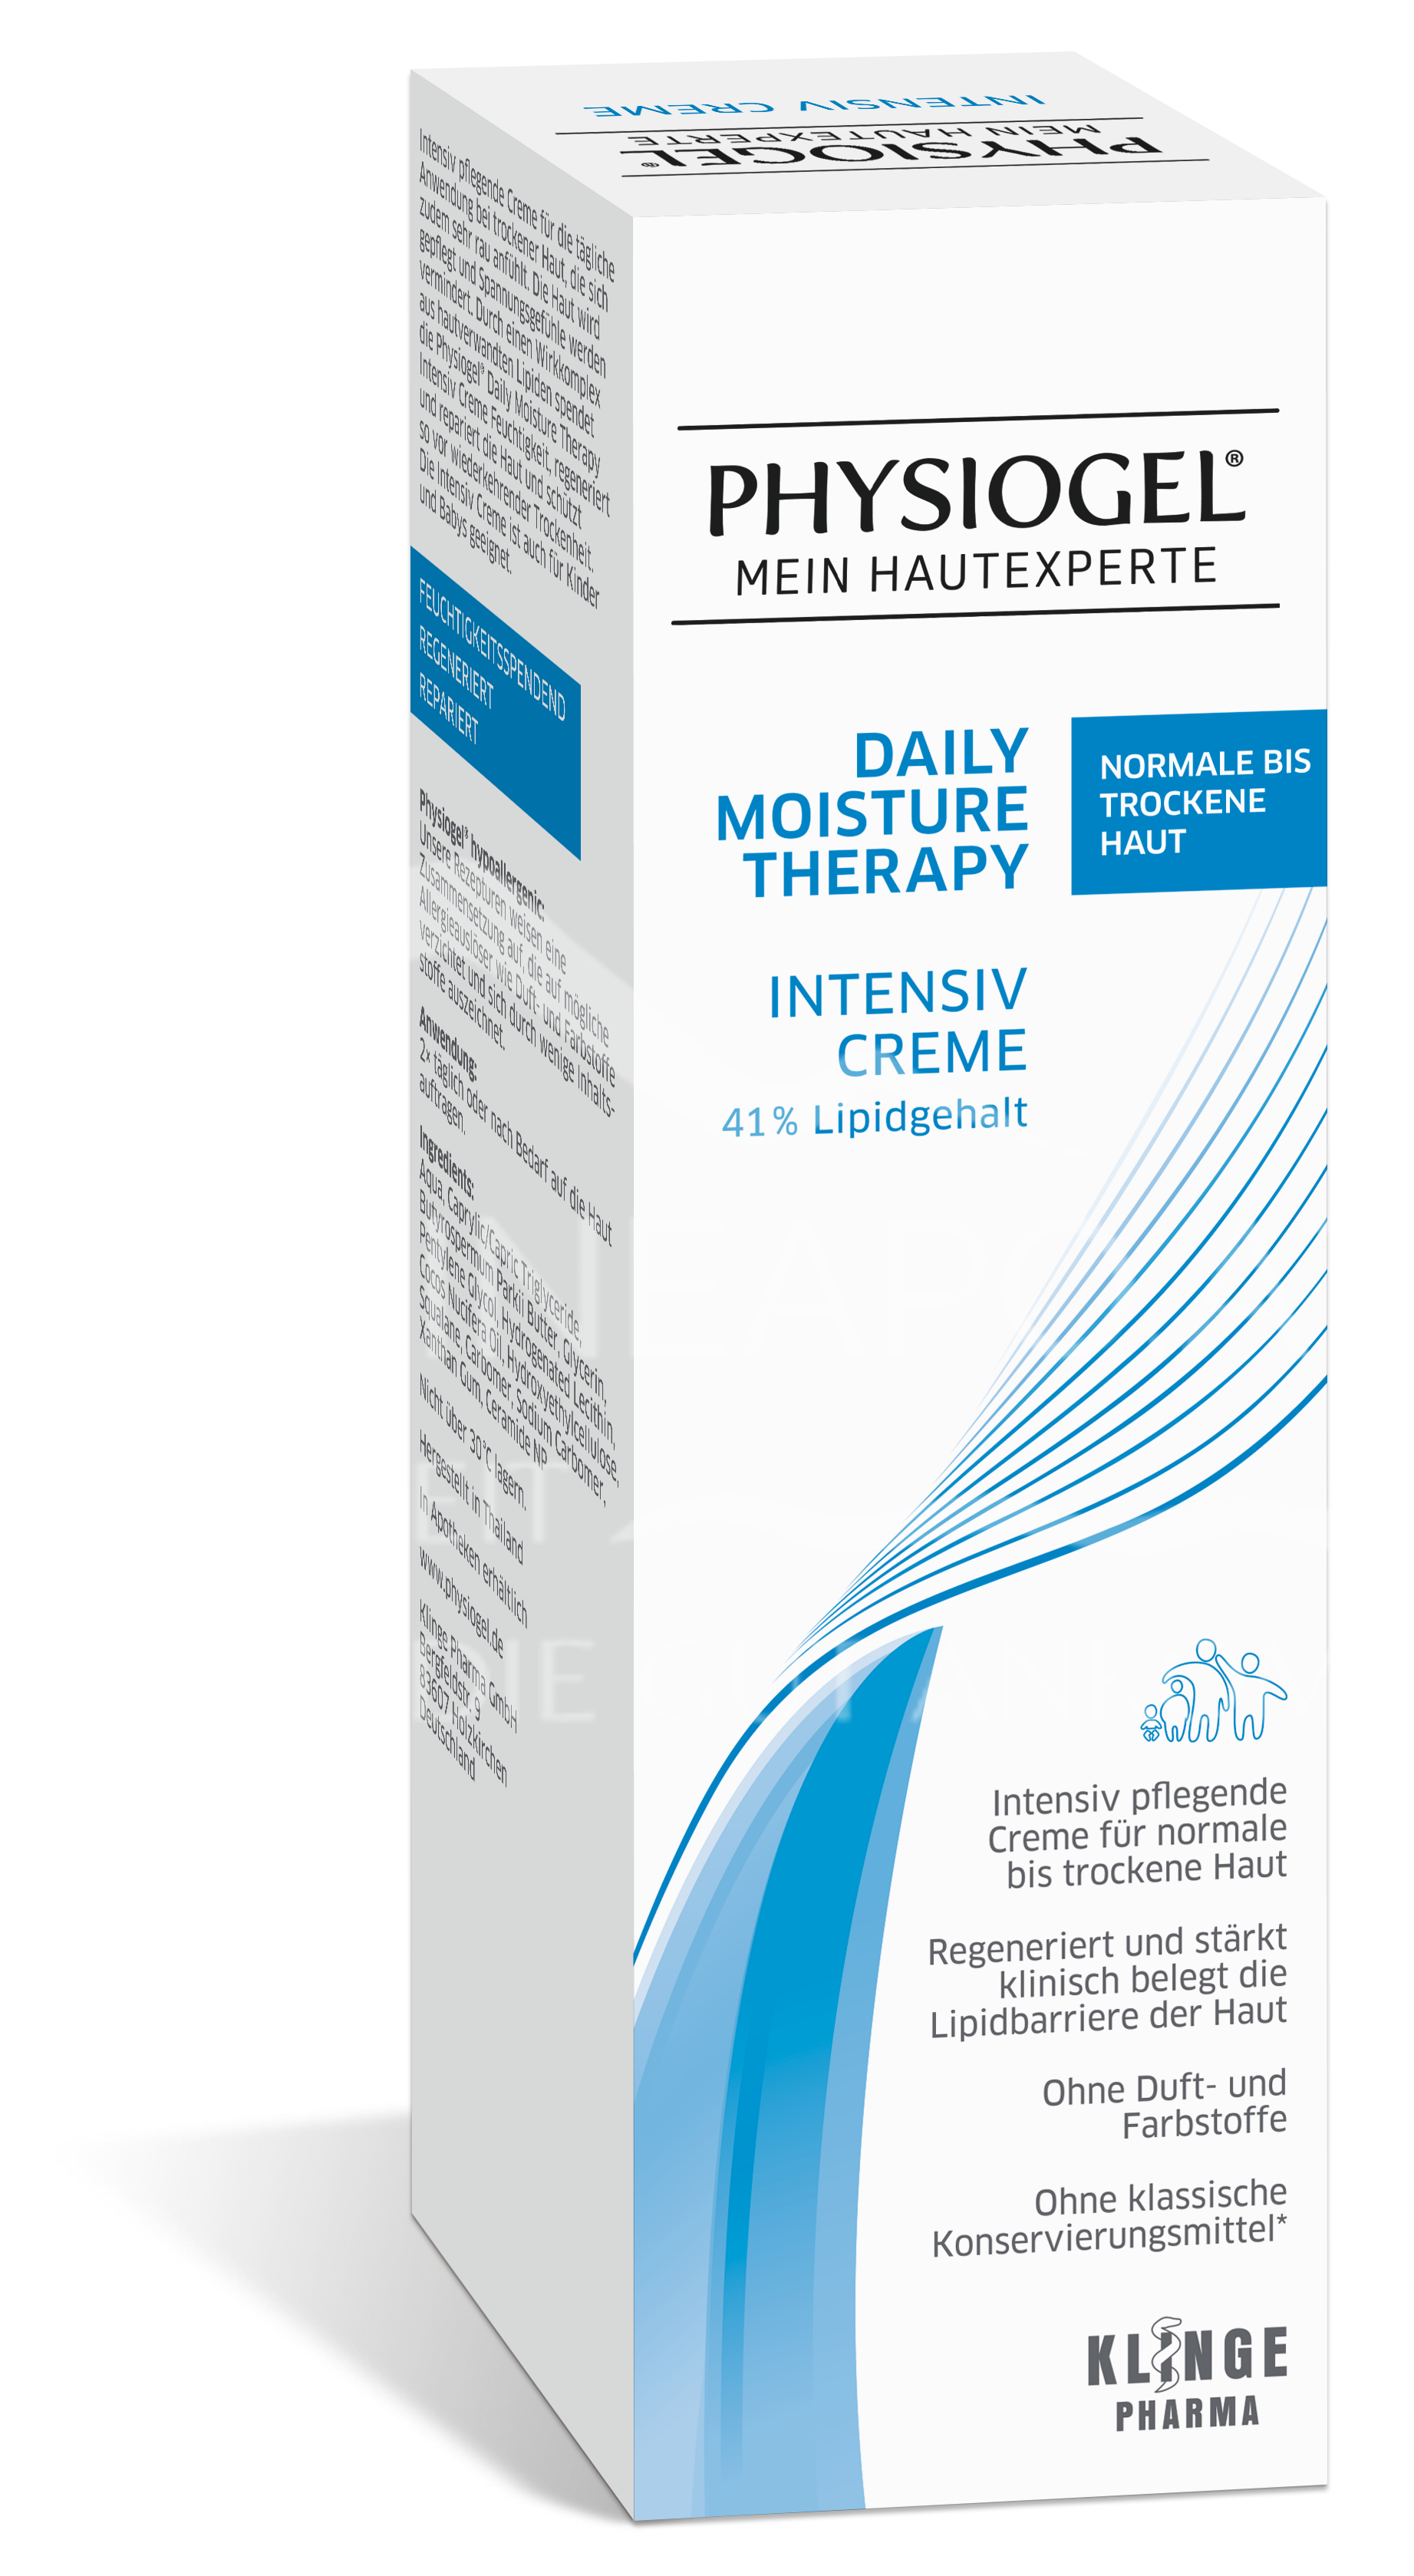 Physiogel® Daily Moisture Therapy Intensiv Creme - Normale bis trockene Haut